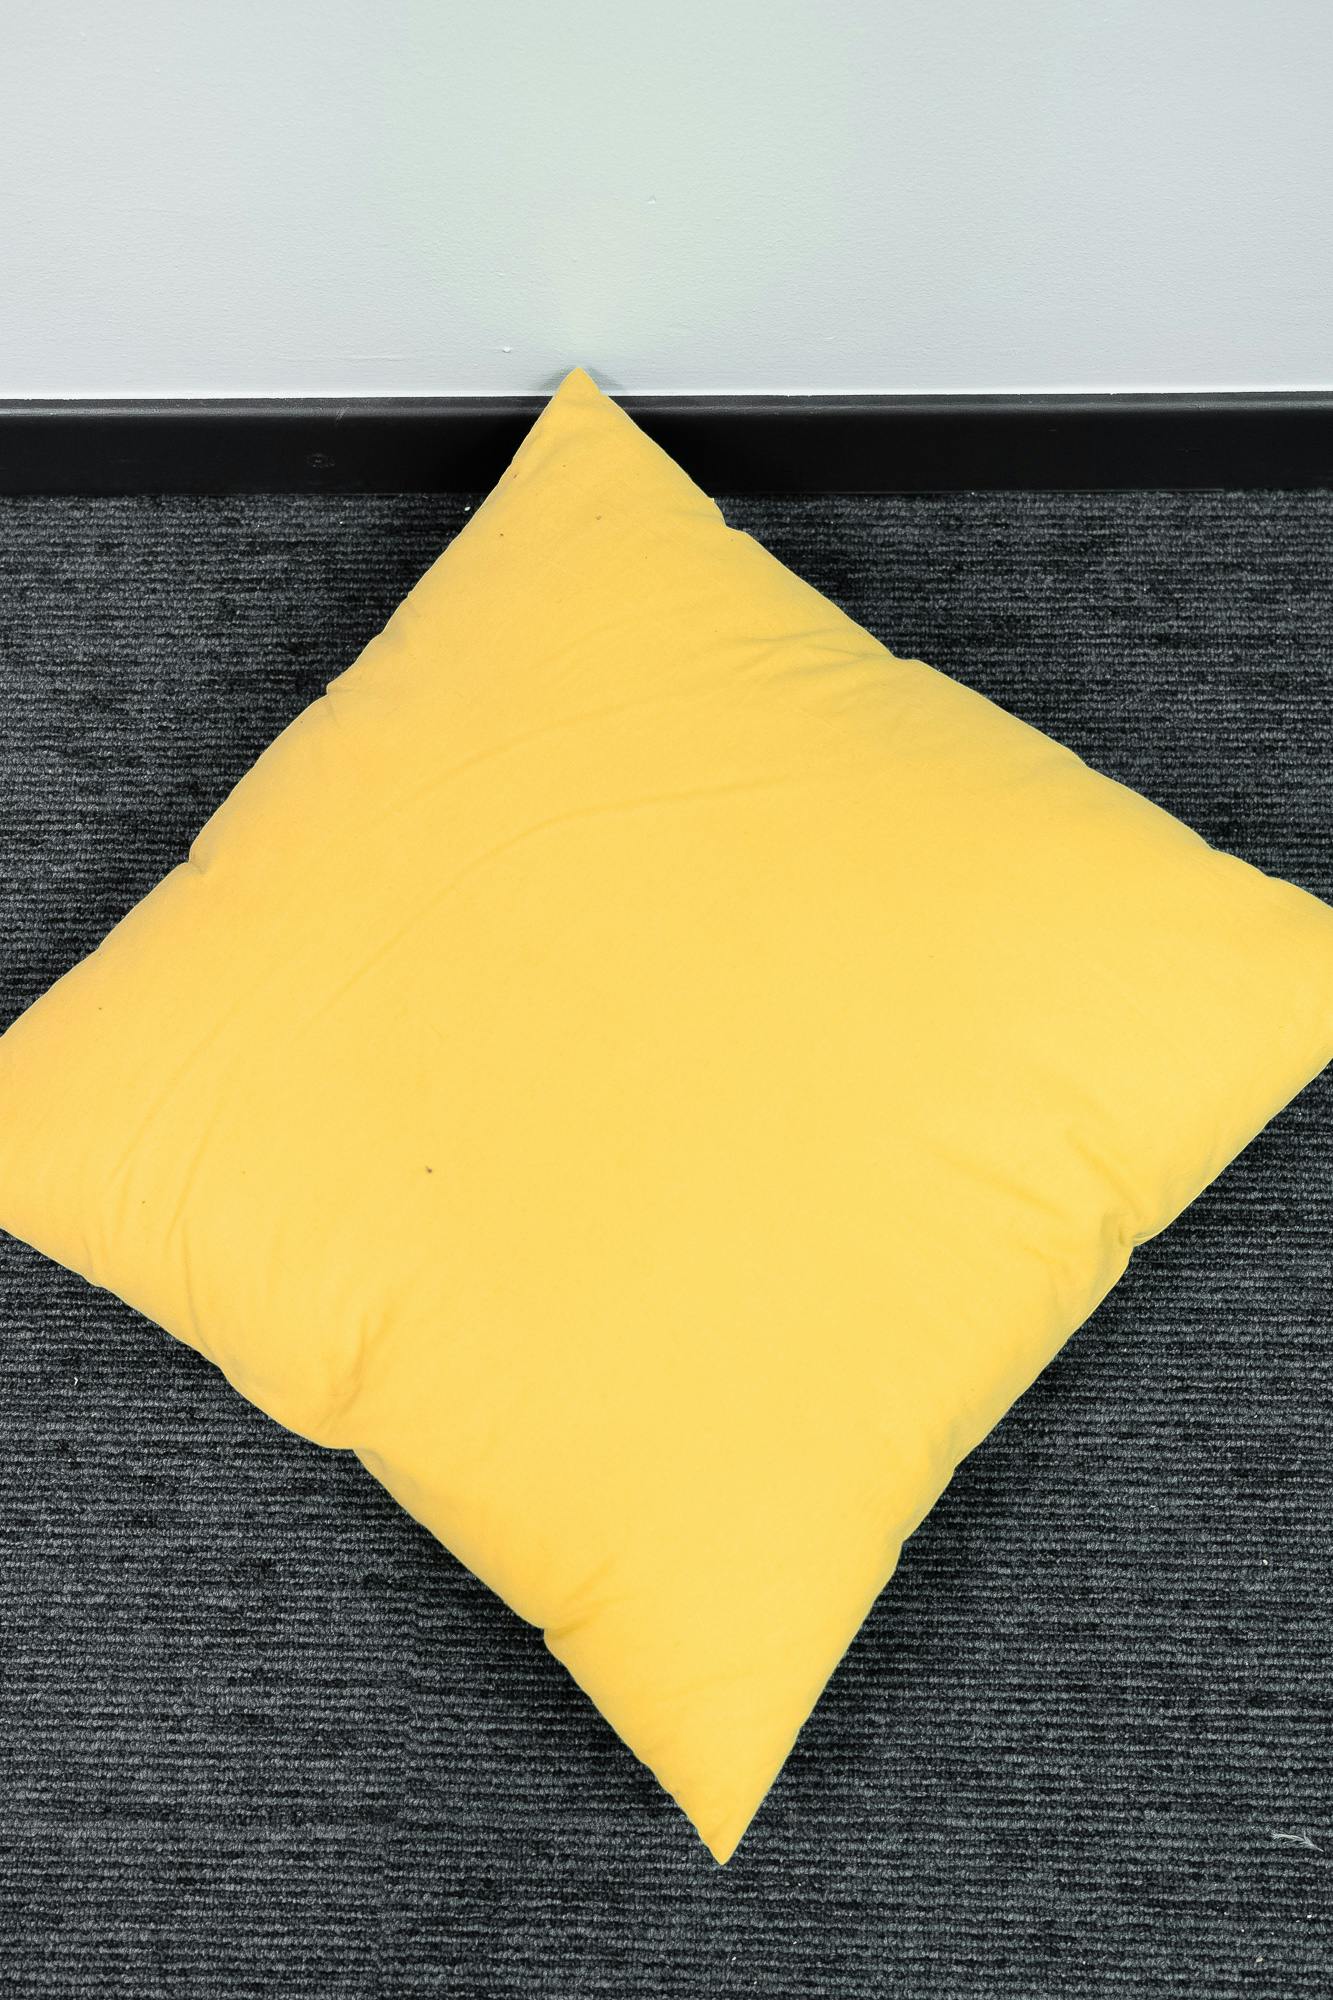 yellow / green fabric cushion - Second hand quality "Miscellaneous" - Relieve Furniture